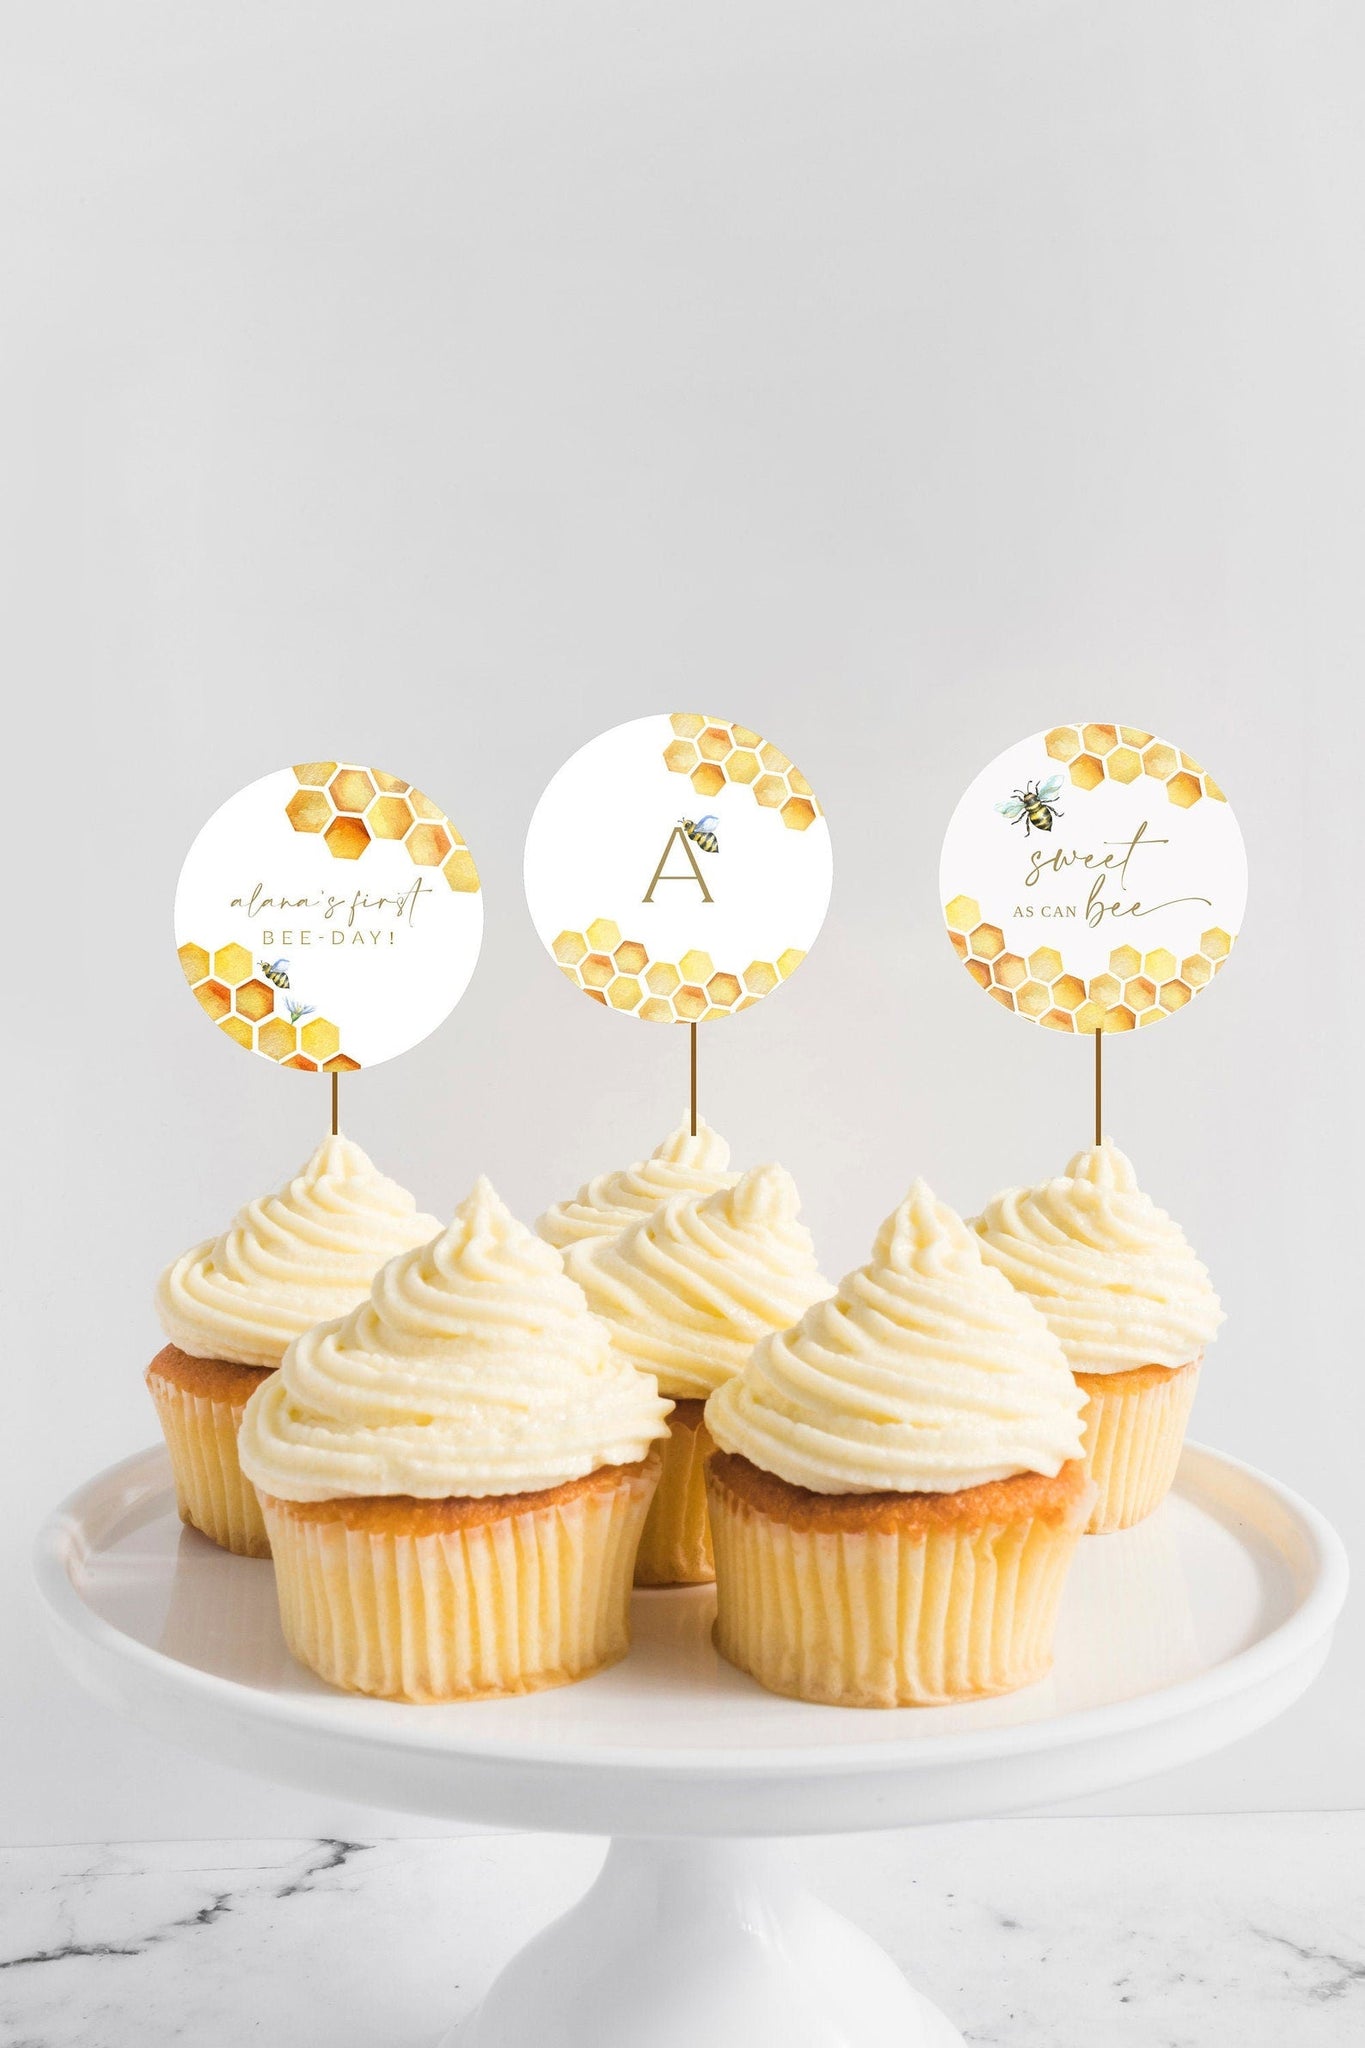 Bees edible cake picture muffin party decoration new gift idea honey